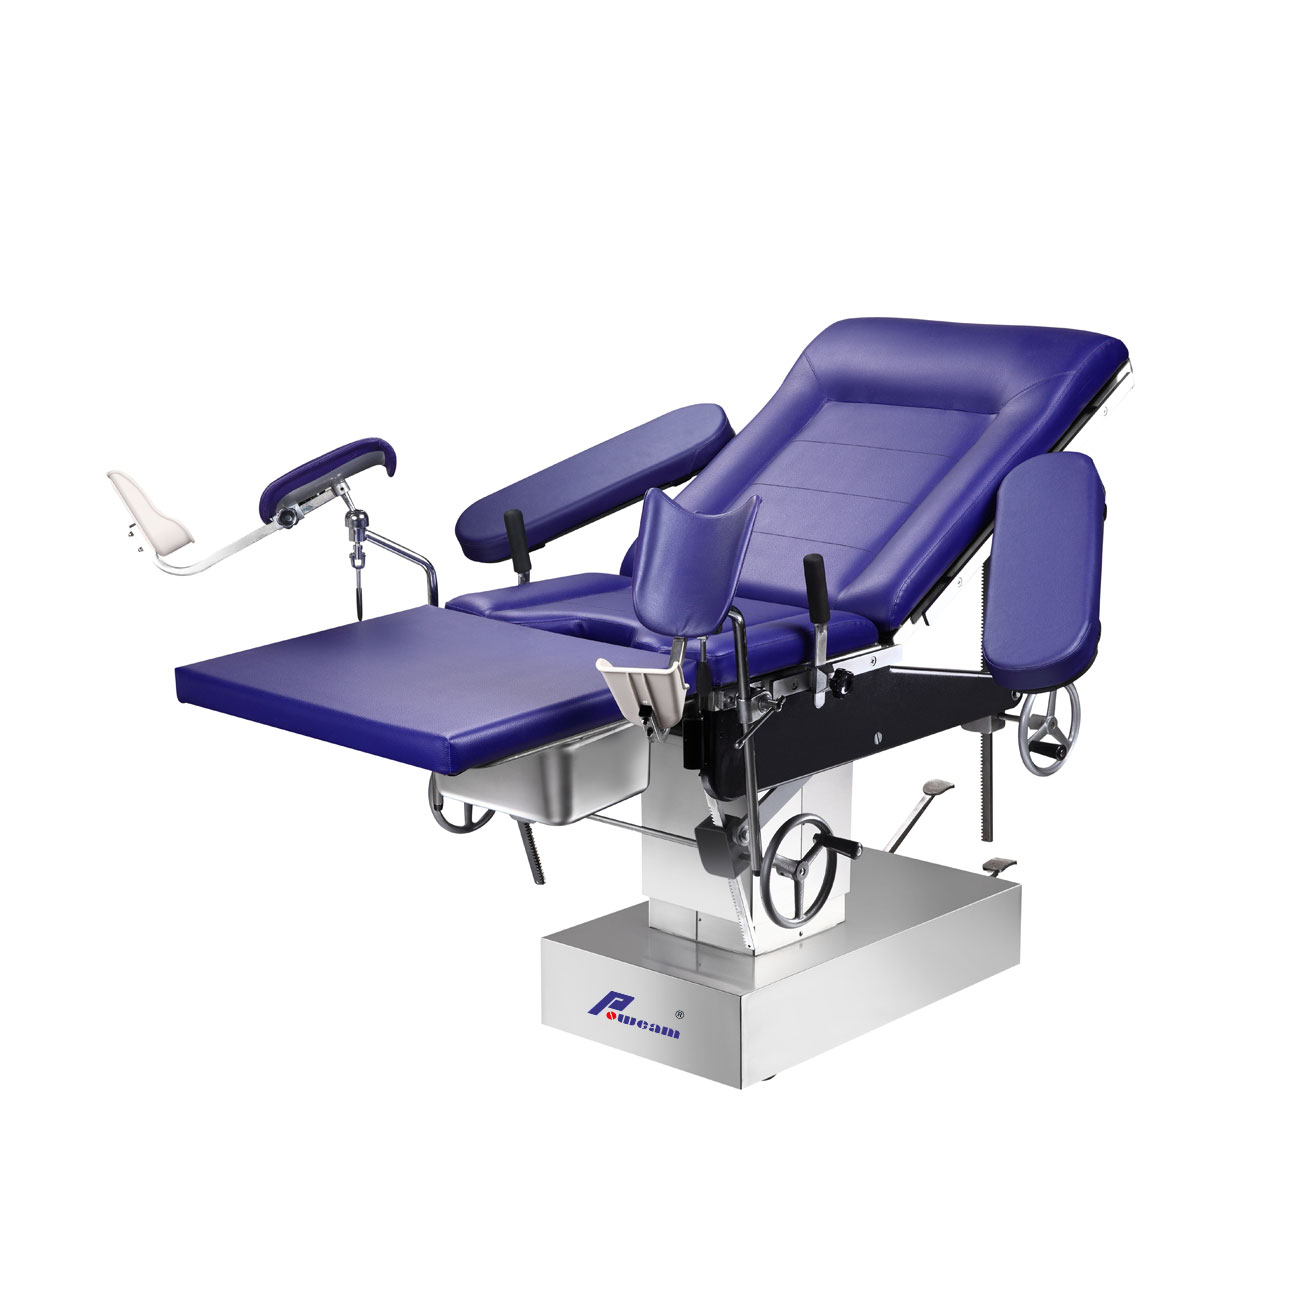 Hydraulic Hospital Bed Manual Obsteric Table (MB4000)